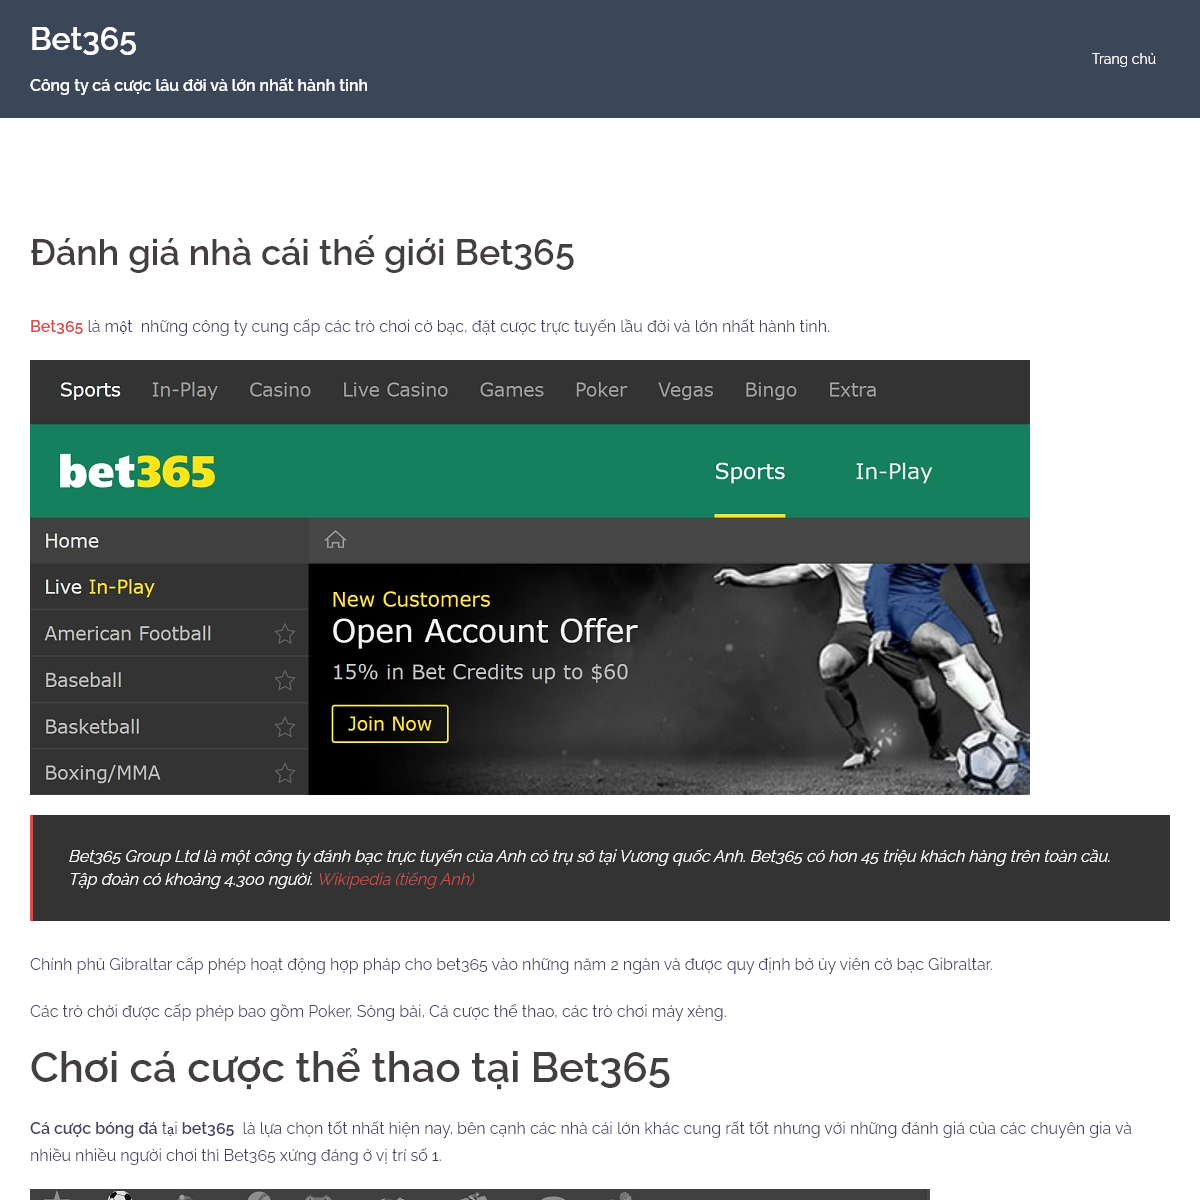 A complete backup of 365bet365.info